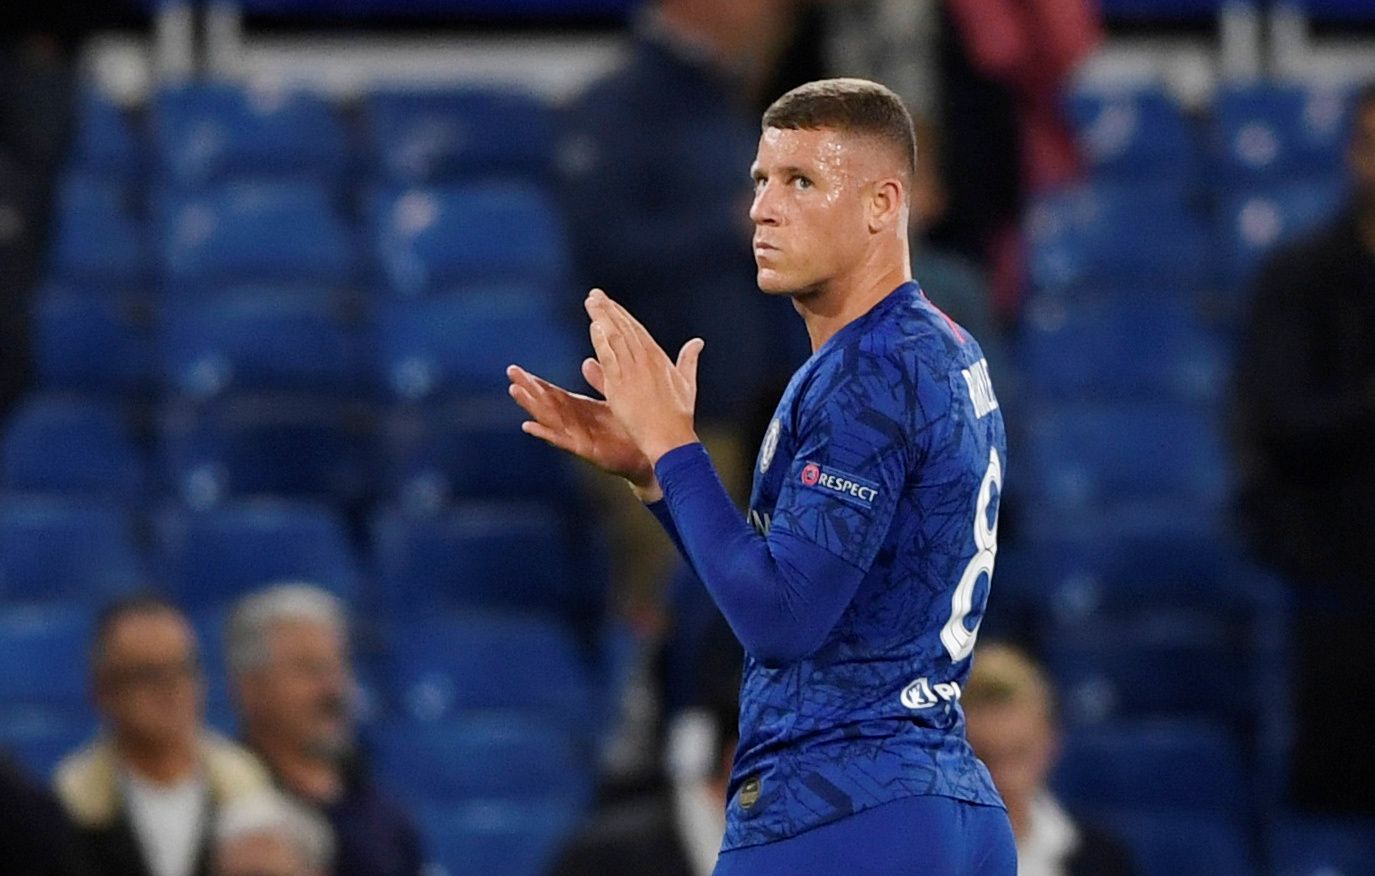 Soccer Football - Champions League - Group H - Chelsea v Valencia - Stamford Bridge, London, Britain - September 17, 2019  Chelsea's Ross Barkley looks dejected as he applauds the fans at the end of the match   Action Images via Reuters/Tony O'Brien